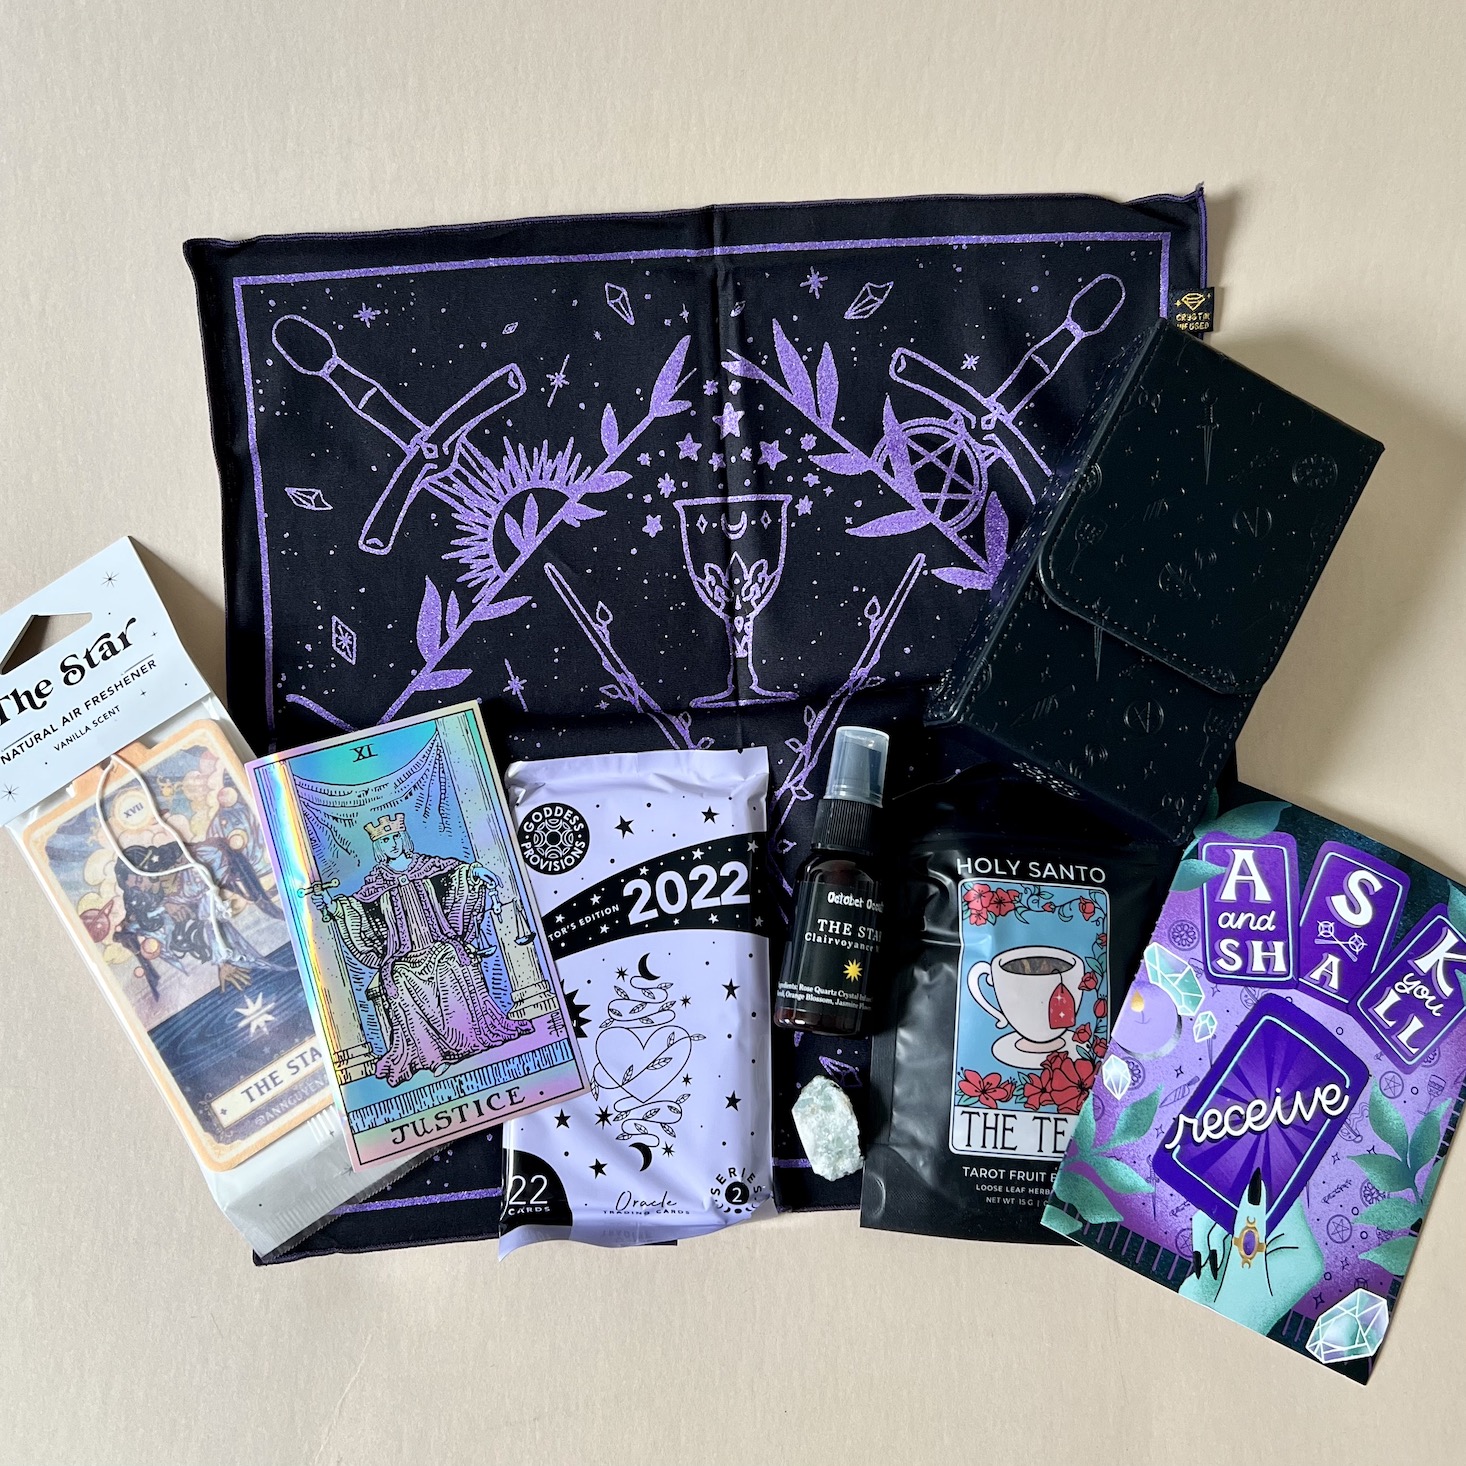 Goddess Provisions “Treasures of the Tarot” August 2022 Review